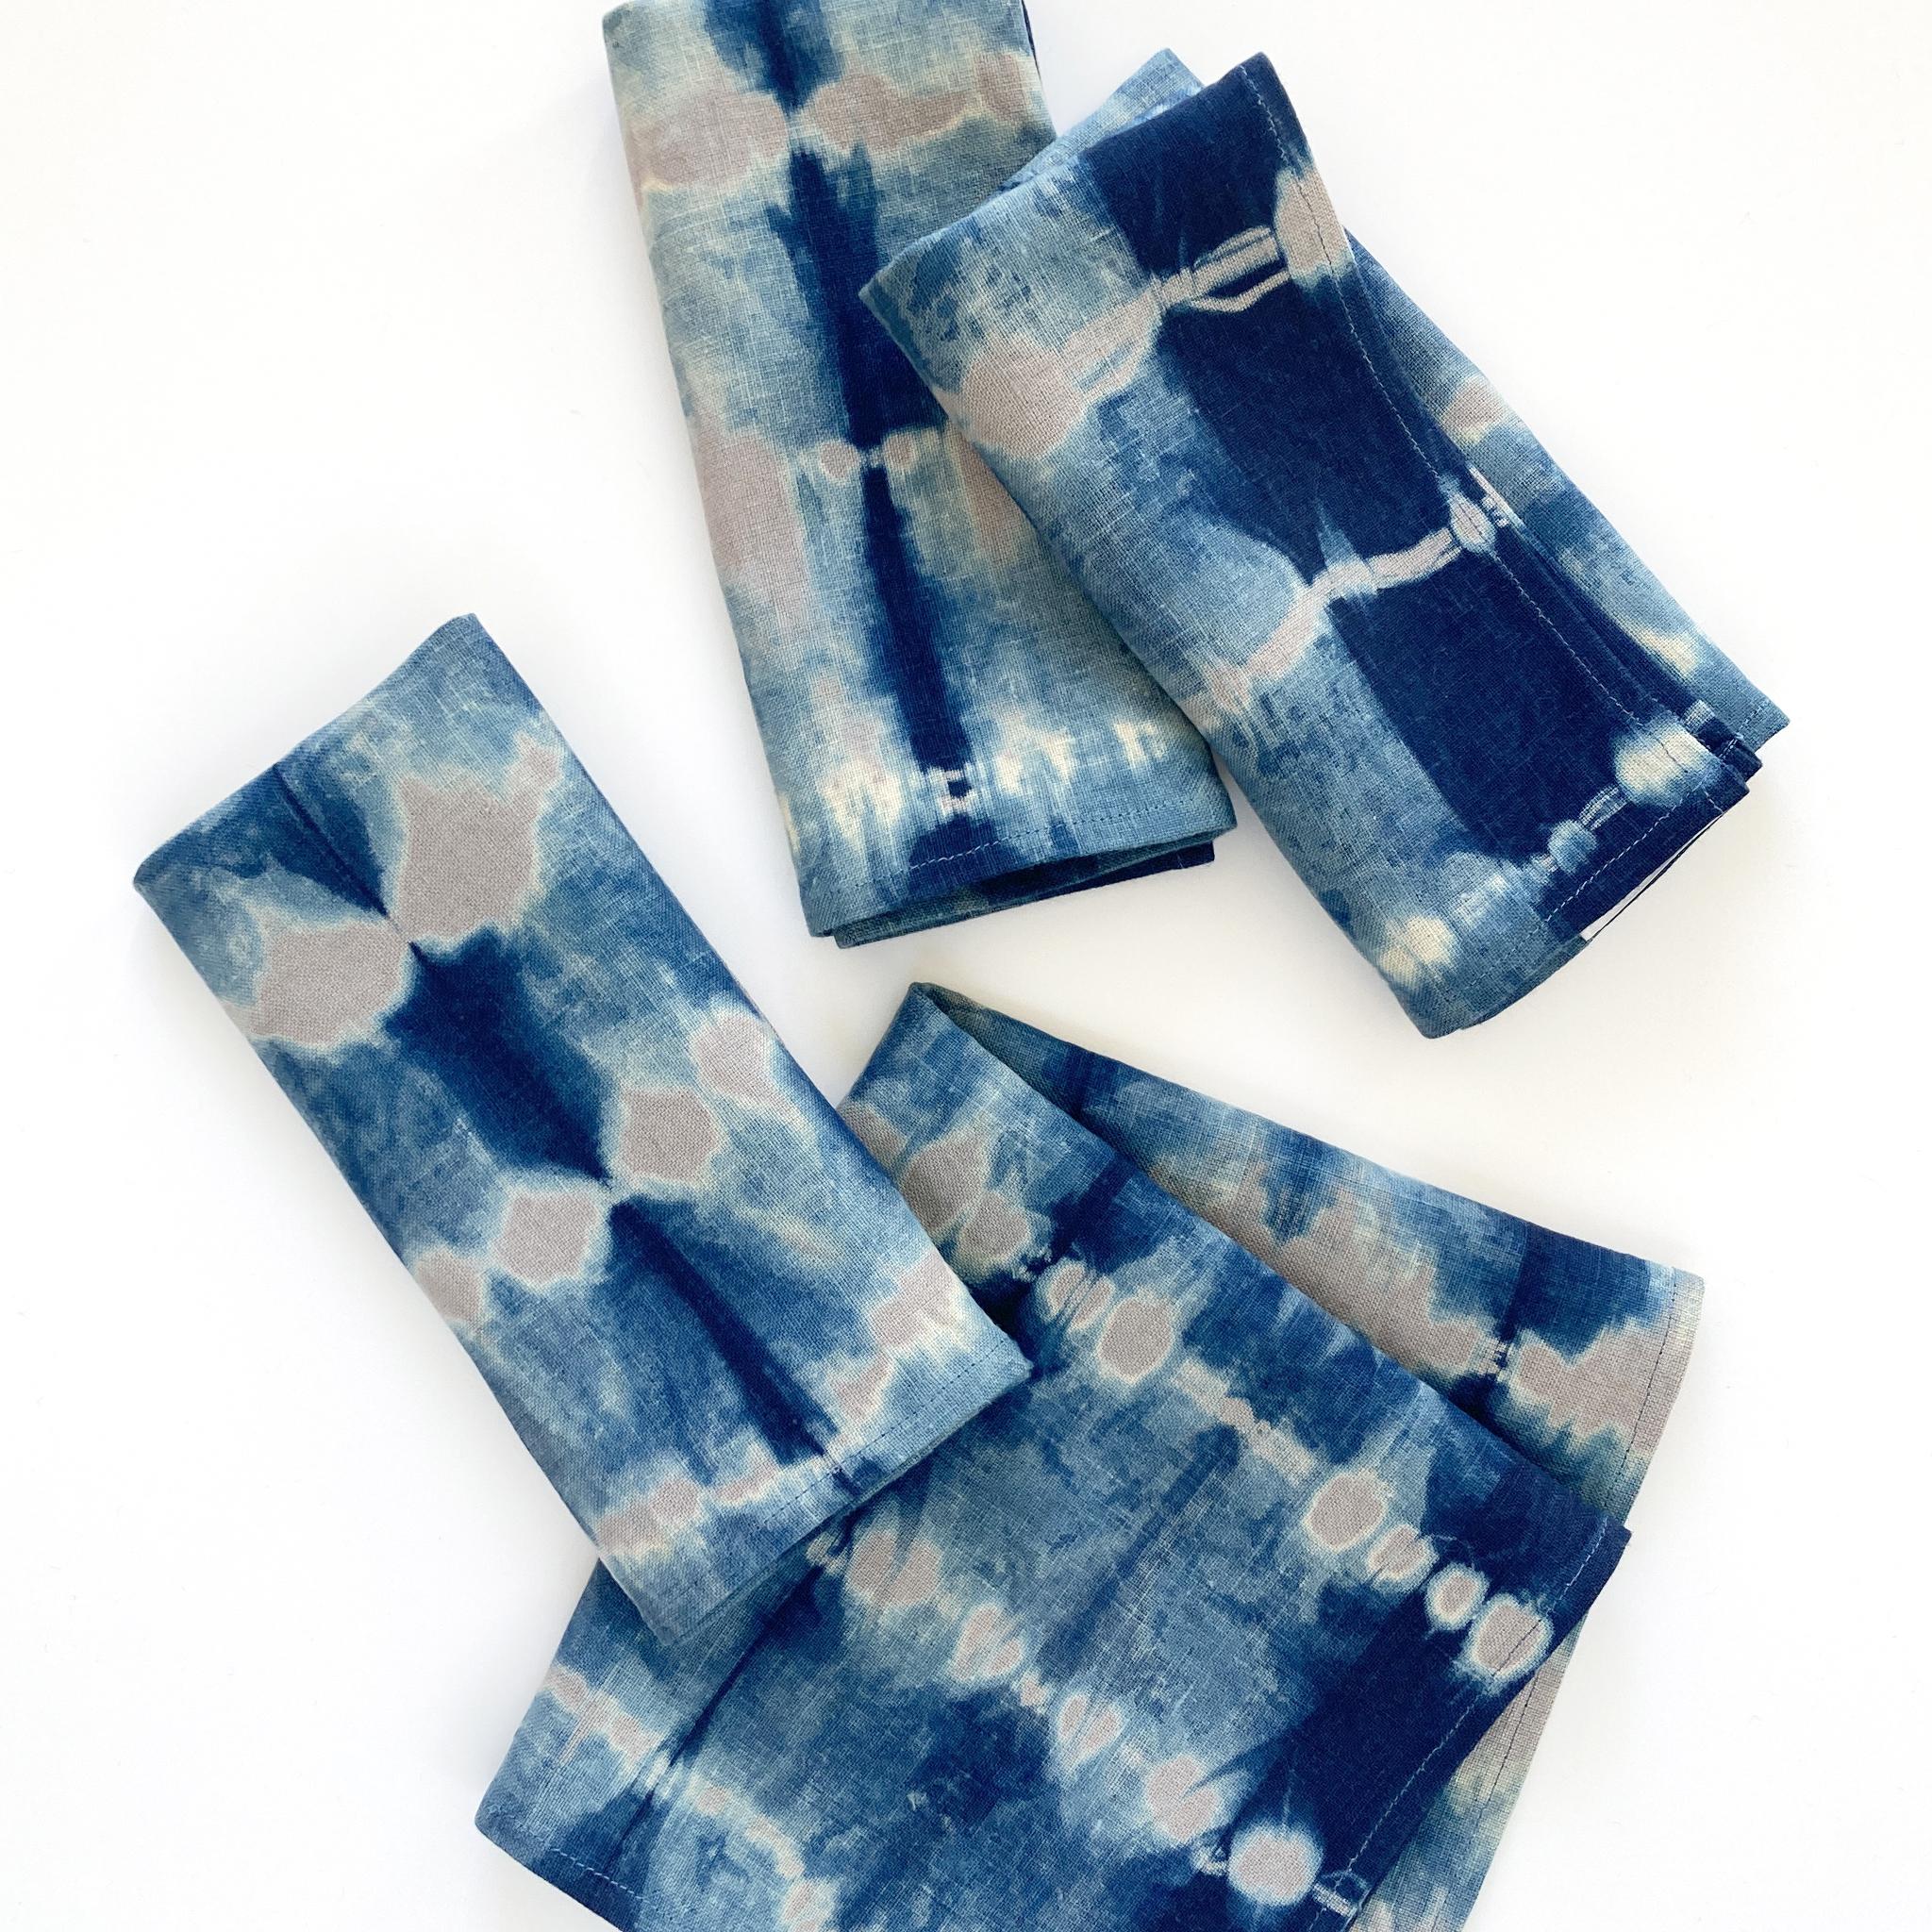 Silver gray linen napkins, set of four, dyed with indigo in Pleat pattern. Hand-dyed and sewn in New York City. Napkins measure approximately 18 x 18 inches. Each linen napkin is hand dyed and one of a kind. 

Each linen panel is cut and folded by